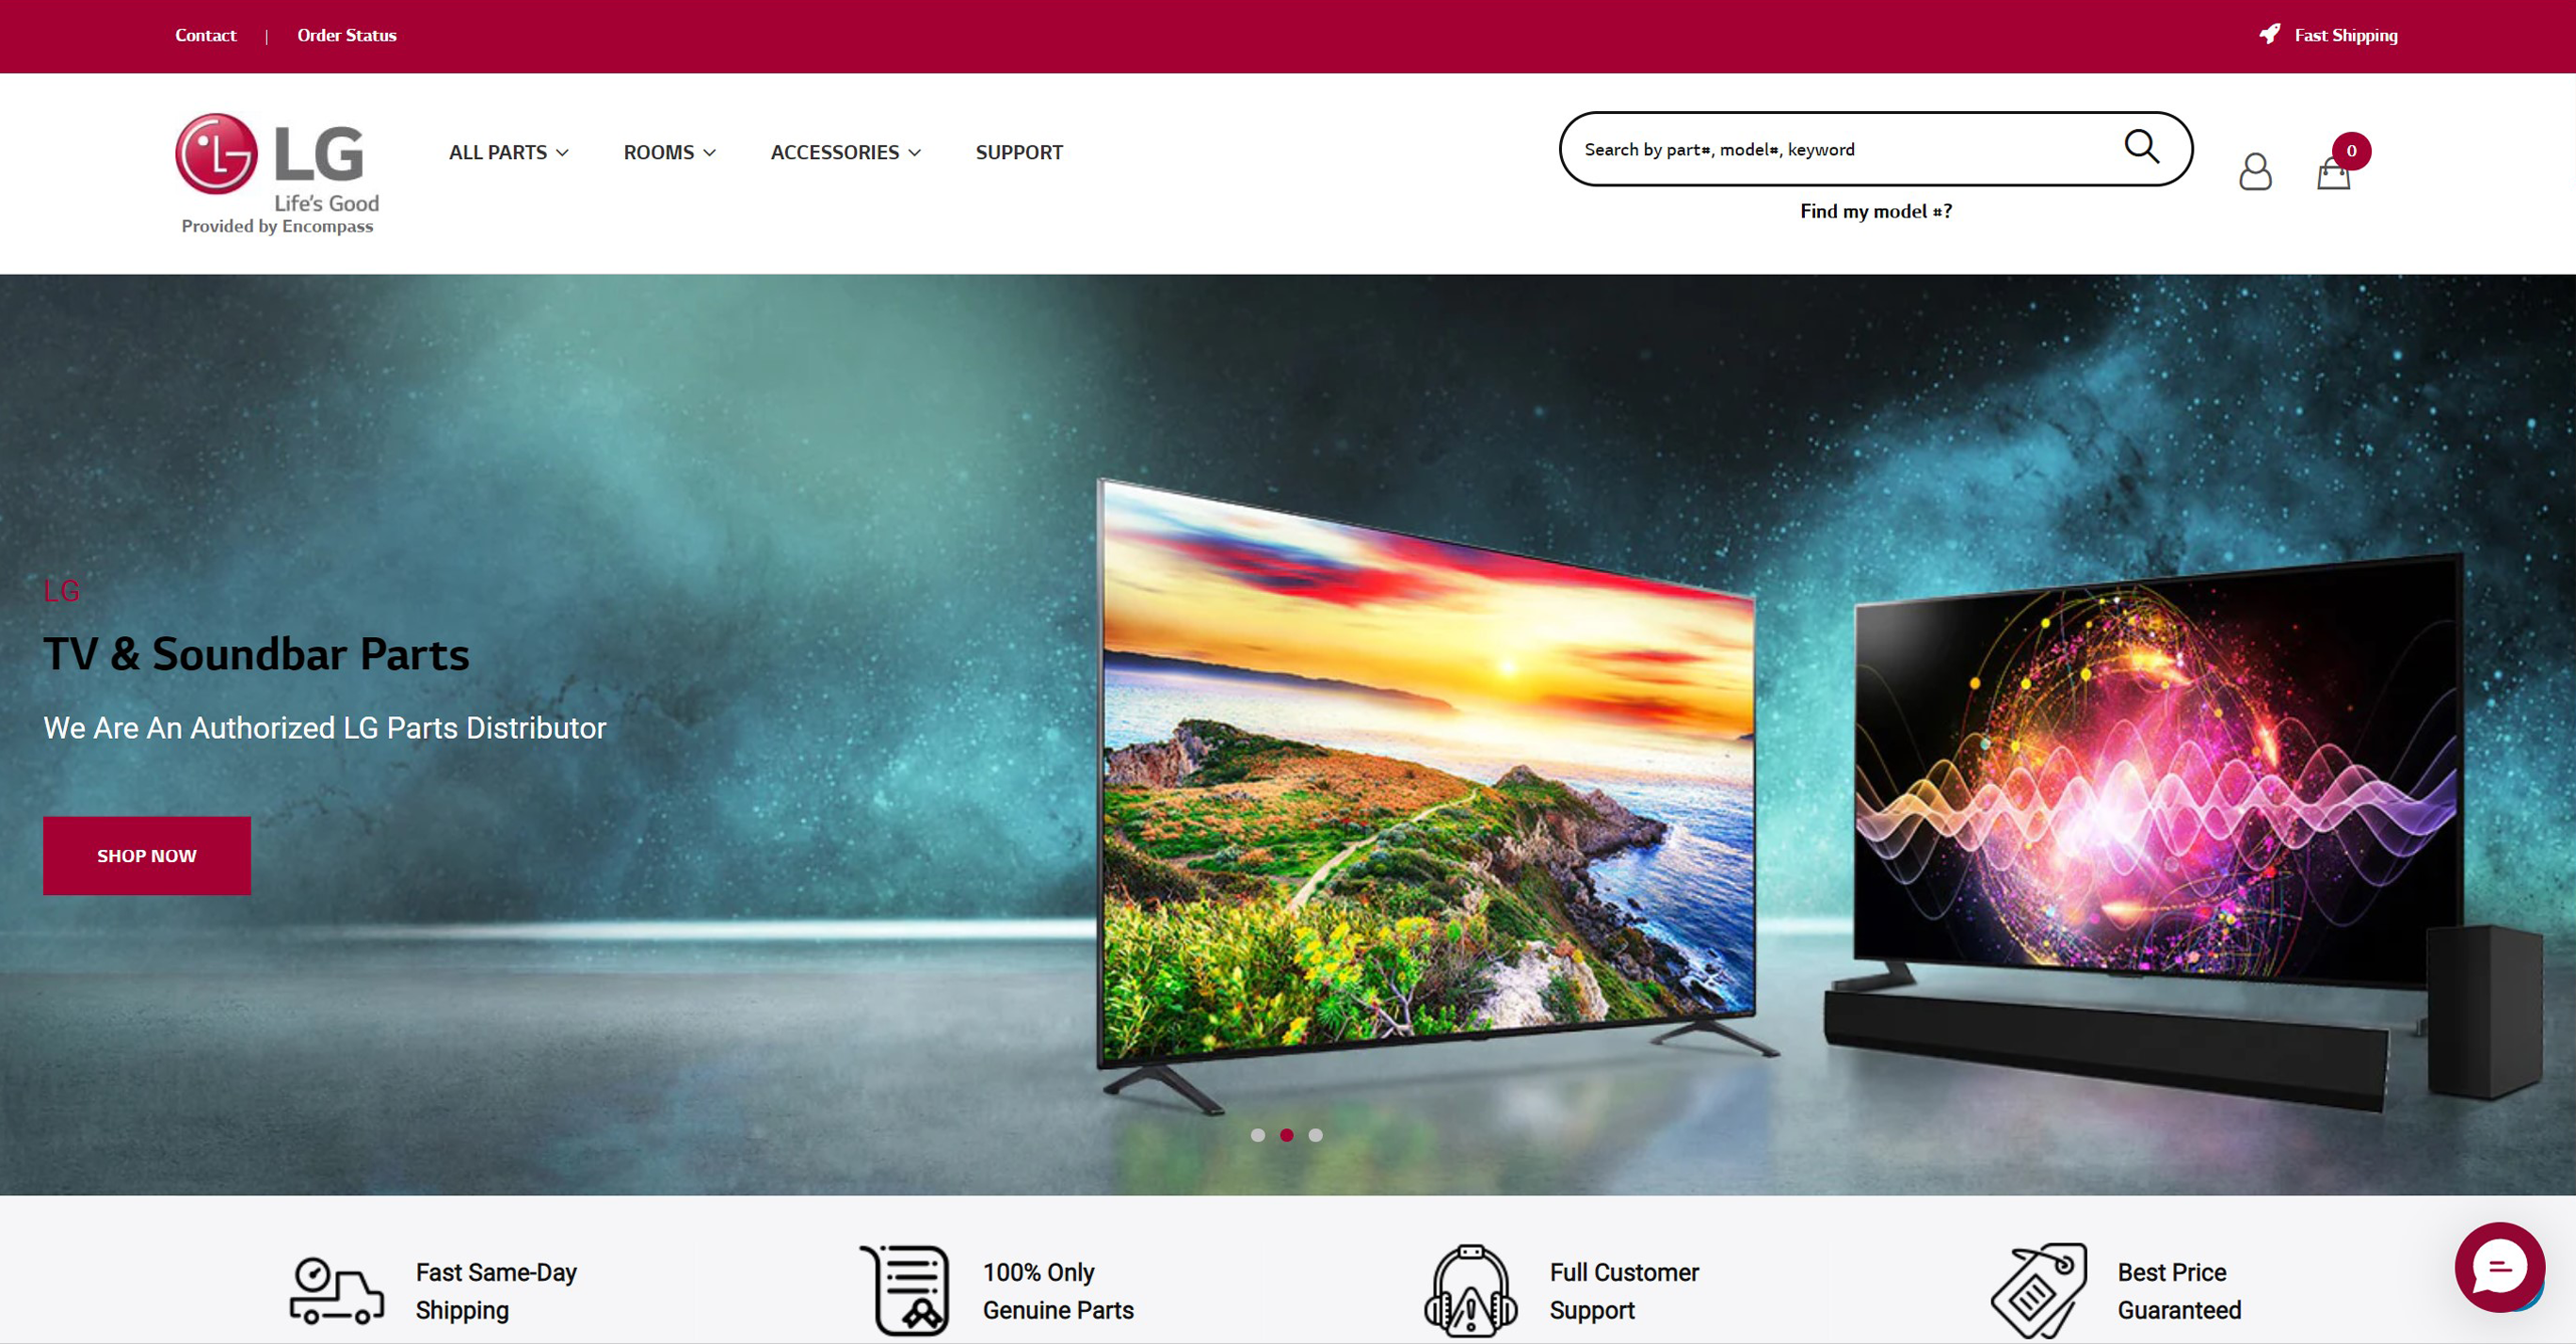 LG Parts & Accessories Retail Website For The DIY Customer image